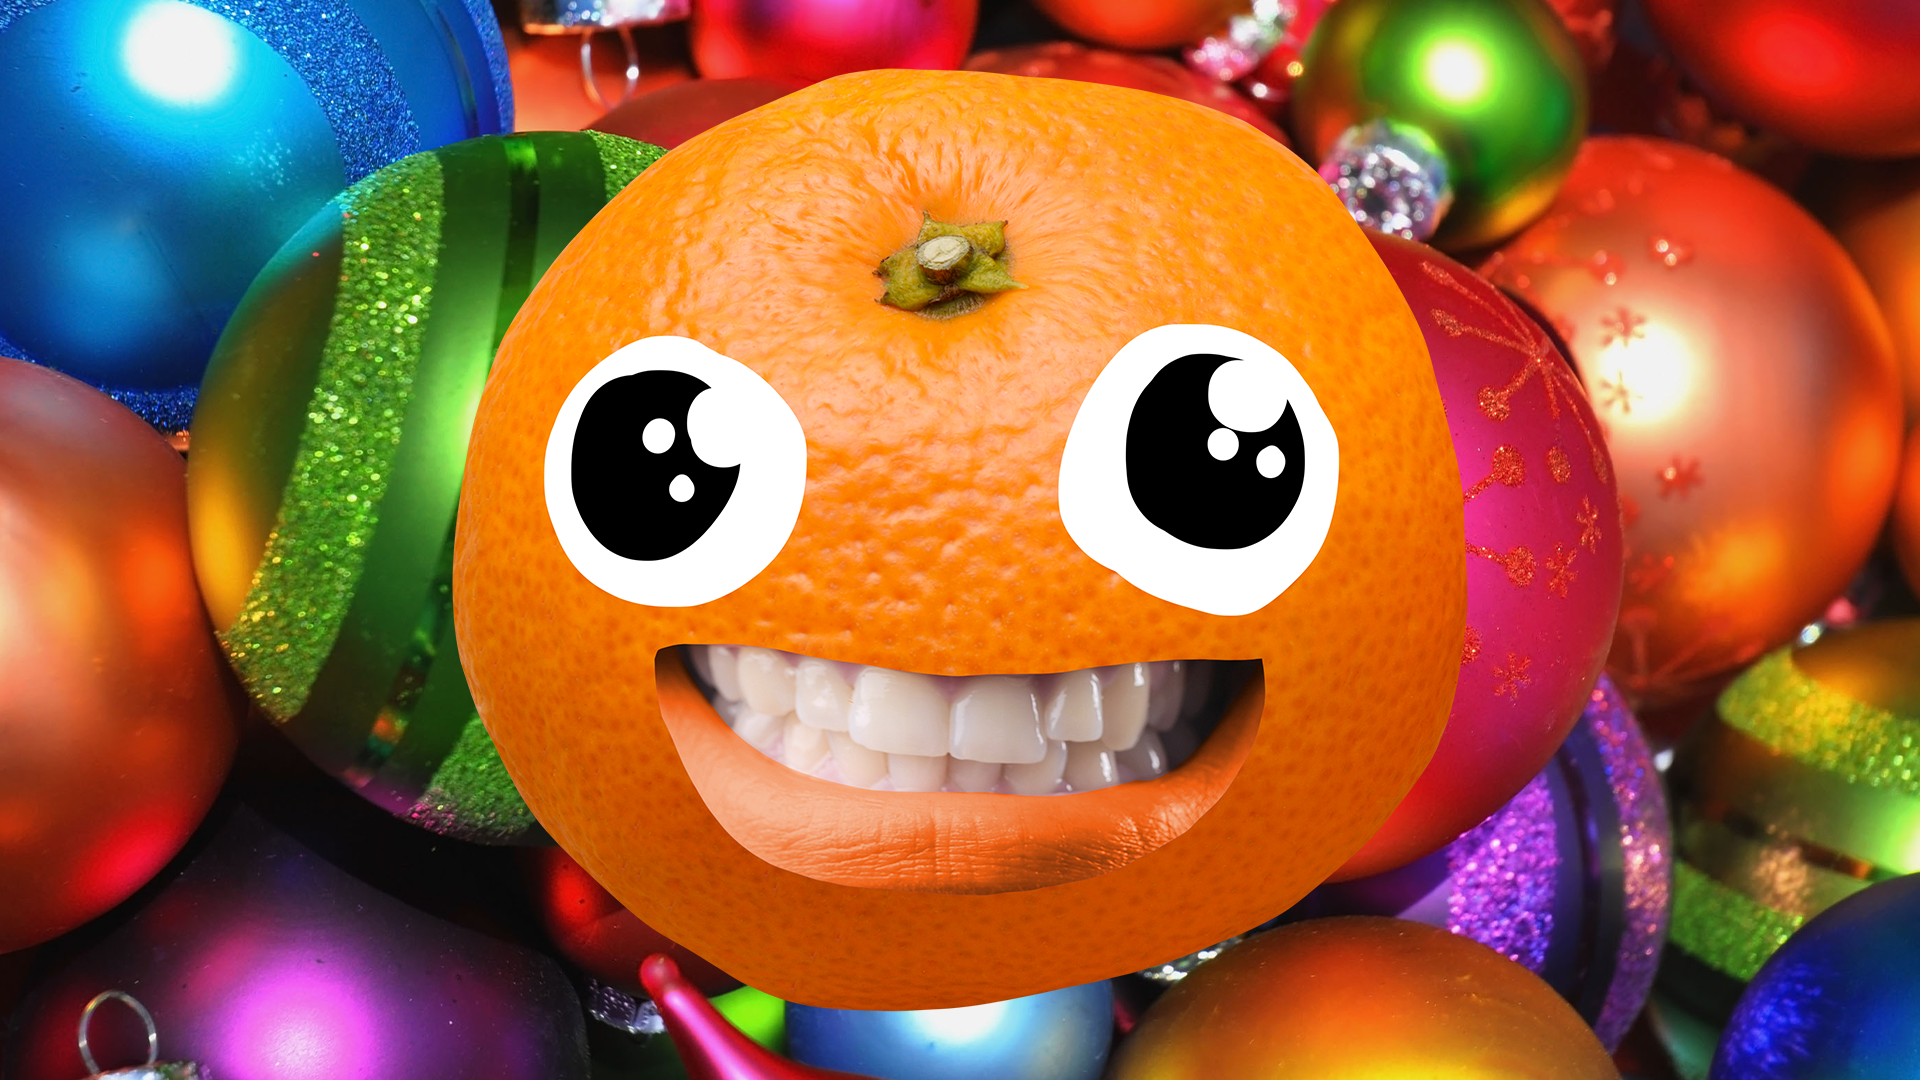 Tangerine with face on bauble background